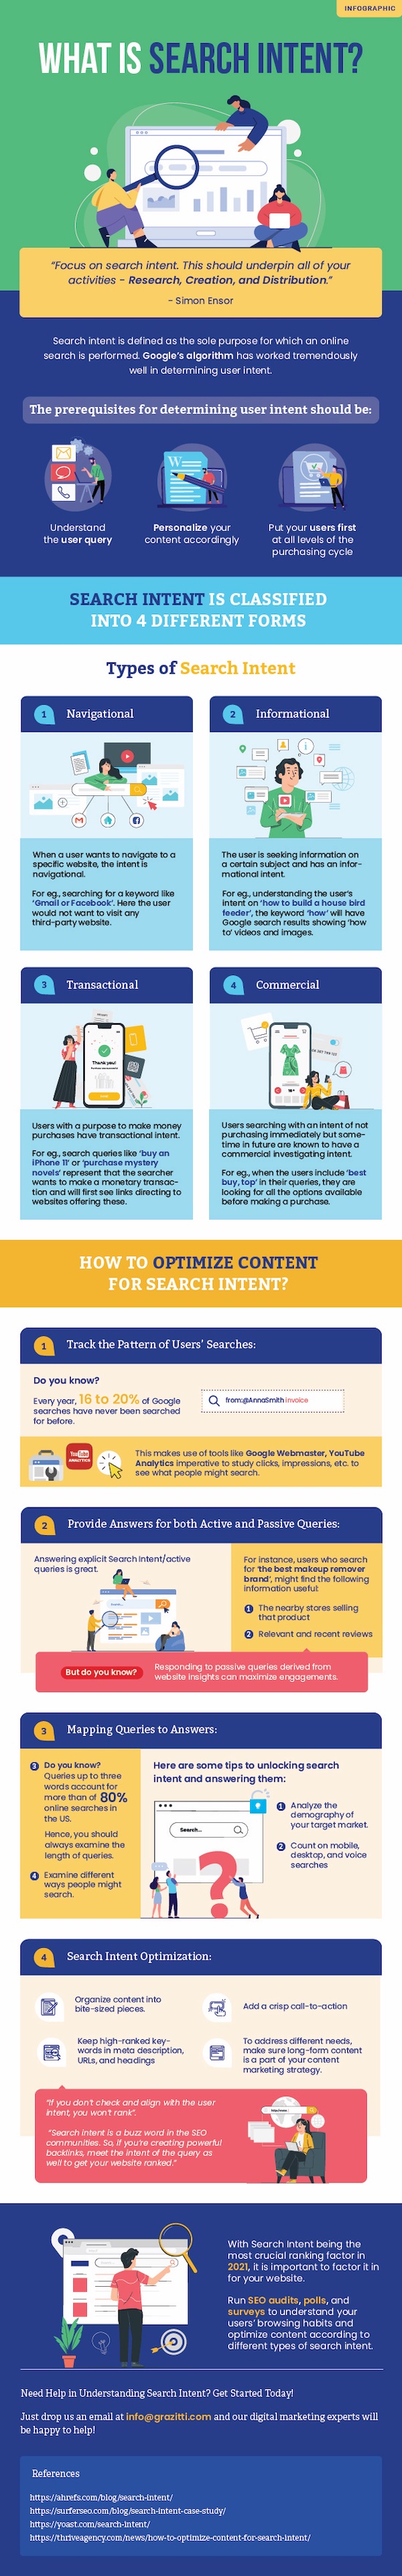 search intent infographic